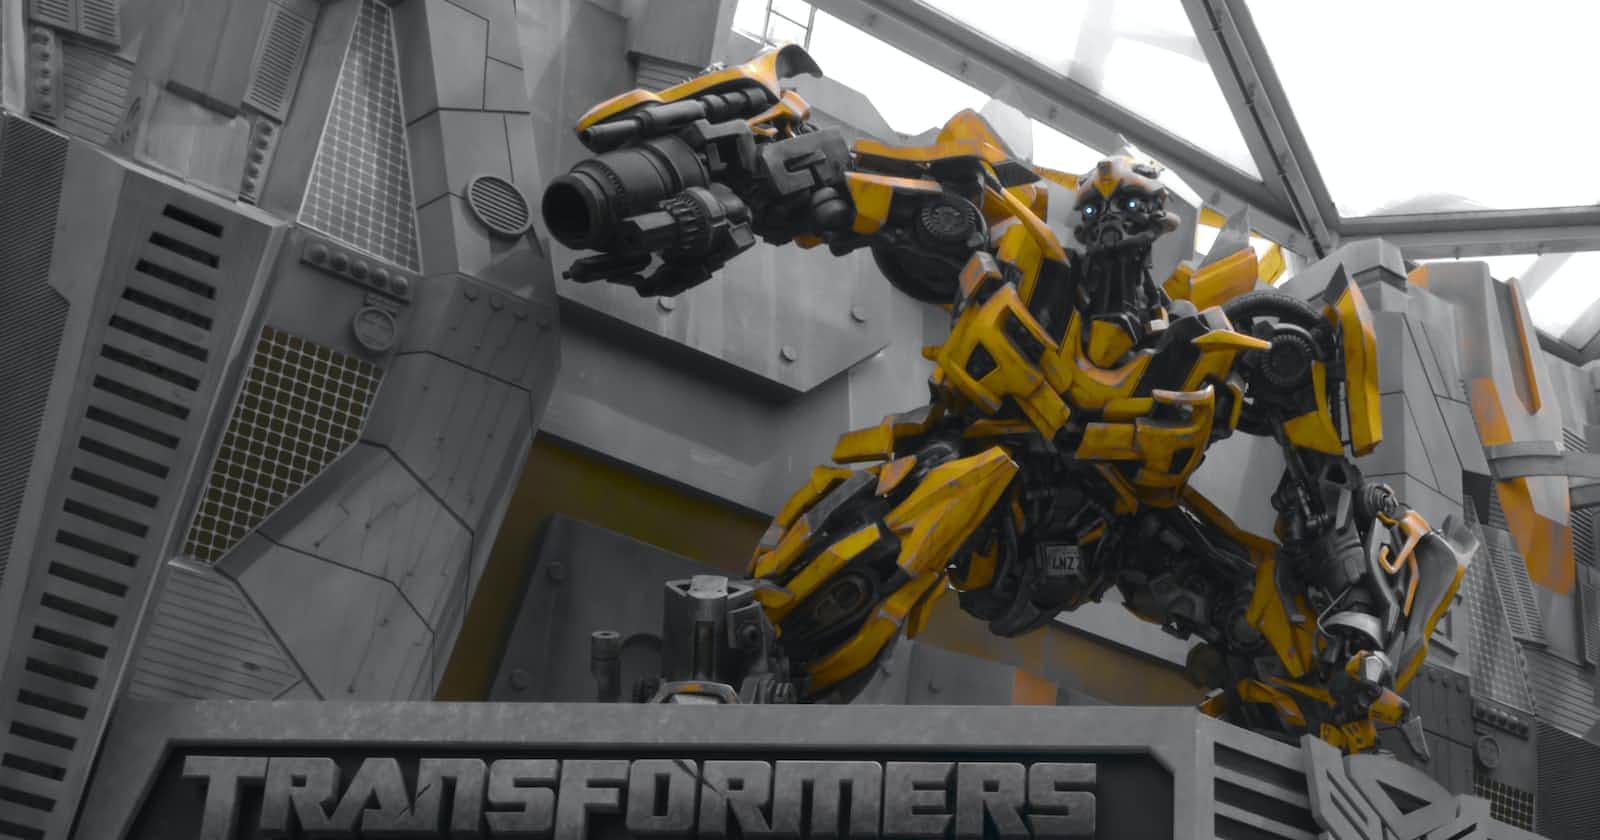 First there was RNN, then came LSTM and now we have Transformers